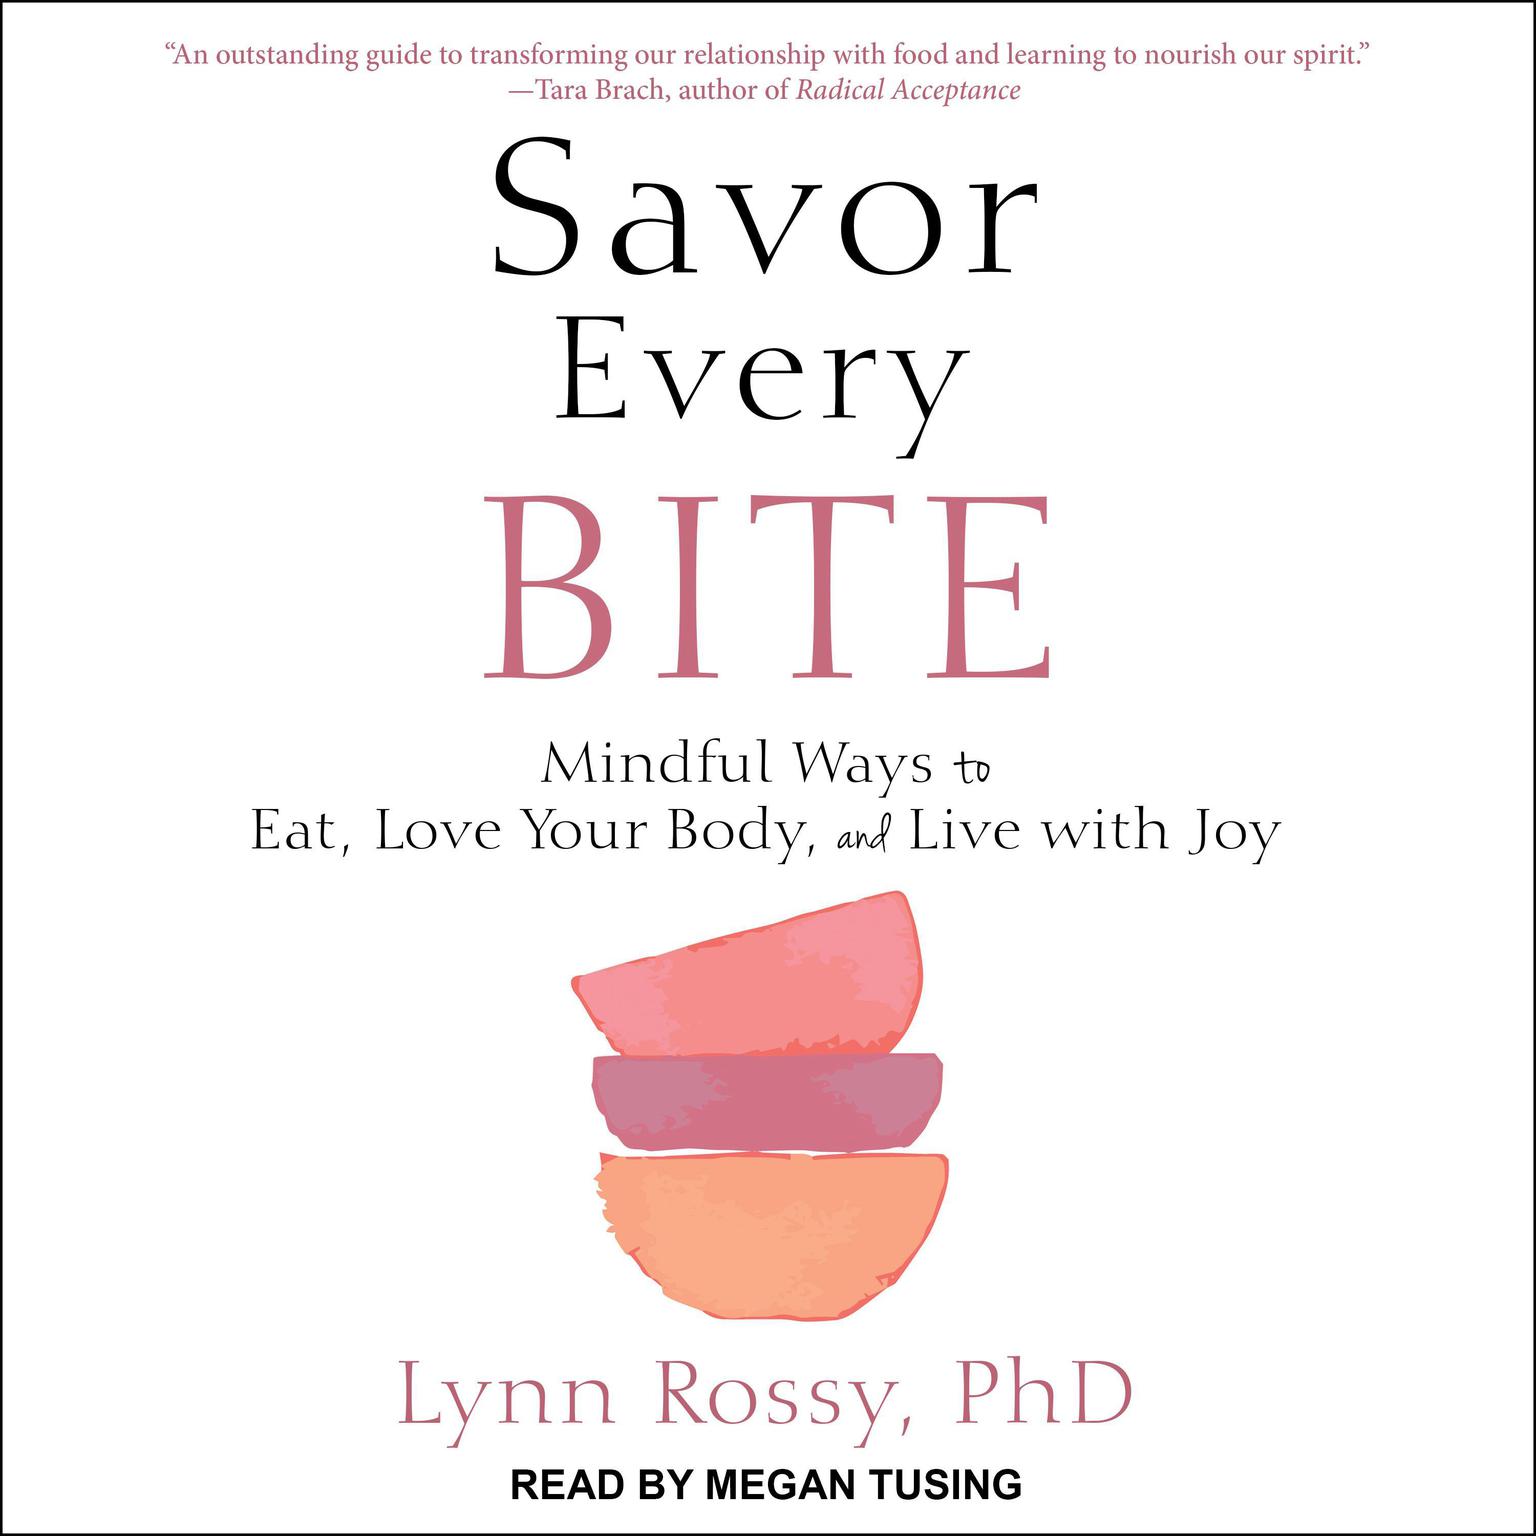 Savor Every Bite: Mindful Ways to Eat, Love Your Body, and Live with Joy Audiobook, by Lynn Rossy